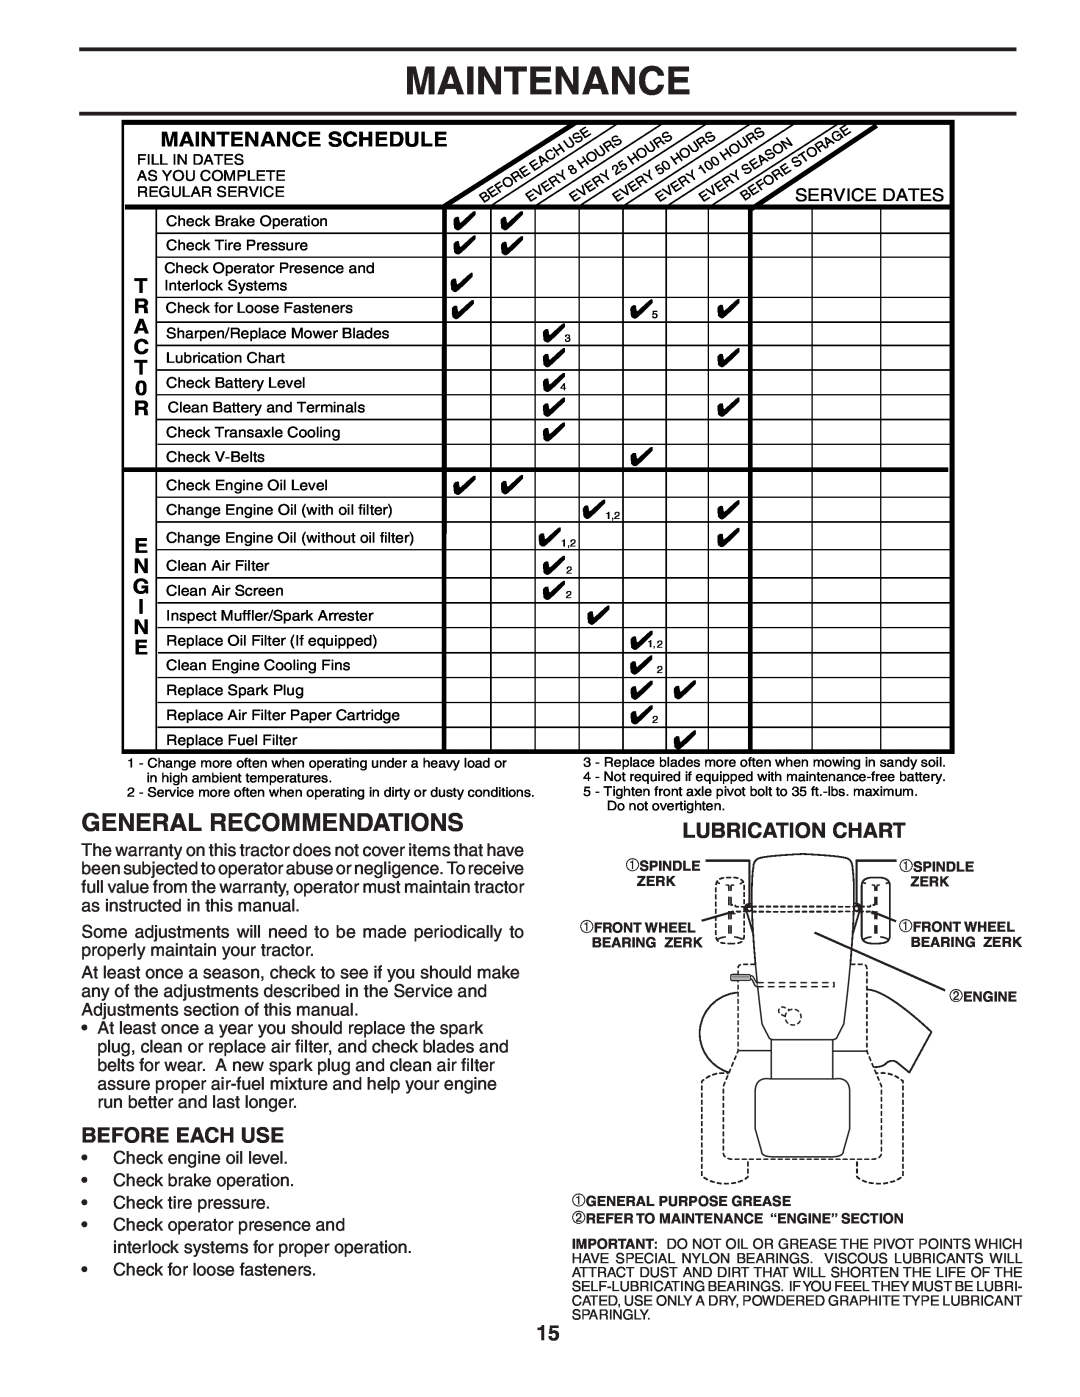 McCulloch 96011013201, MC16H38ST manual Maintenance, General Recommendations, Lubrication Chart, Before Each Use 